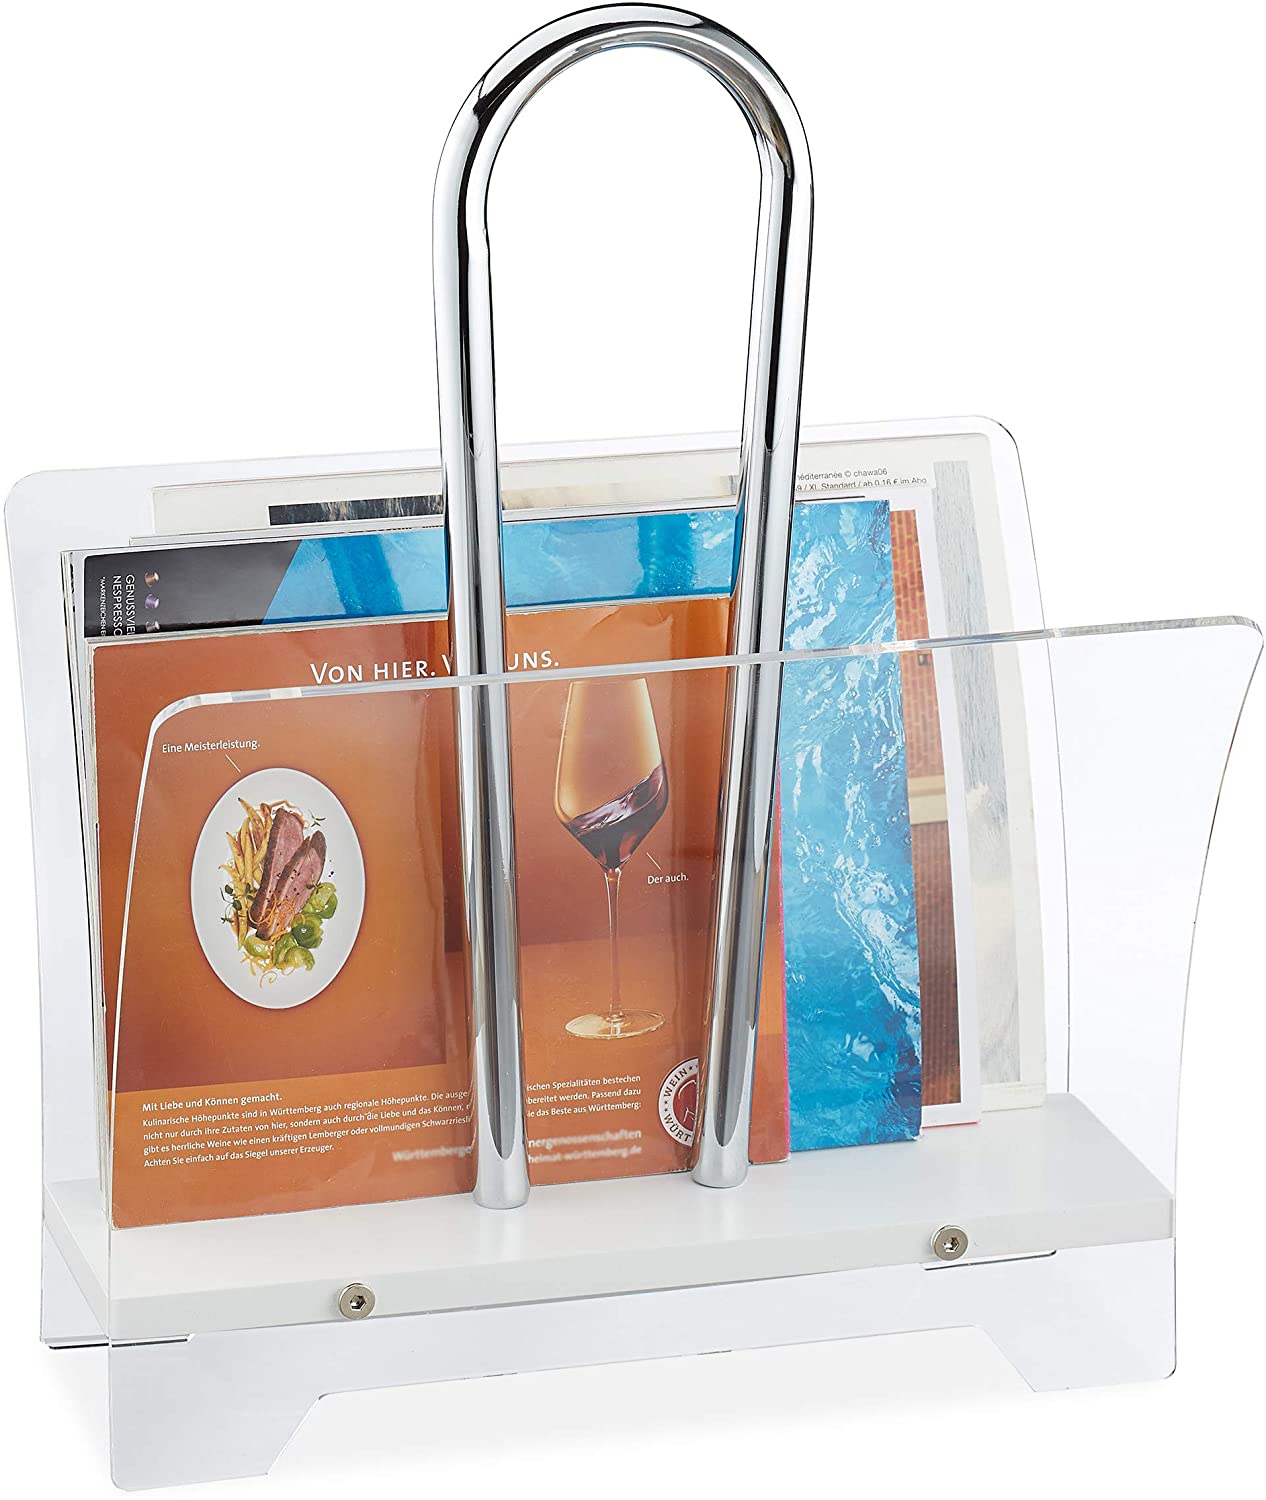 Relaxdays Newspaper Rack With Handle For Newspapers & Magazines Modern Desi